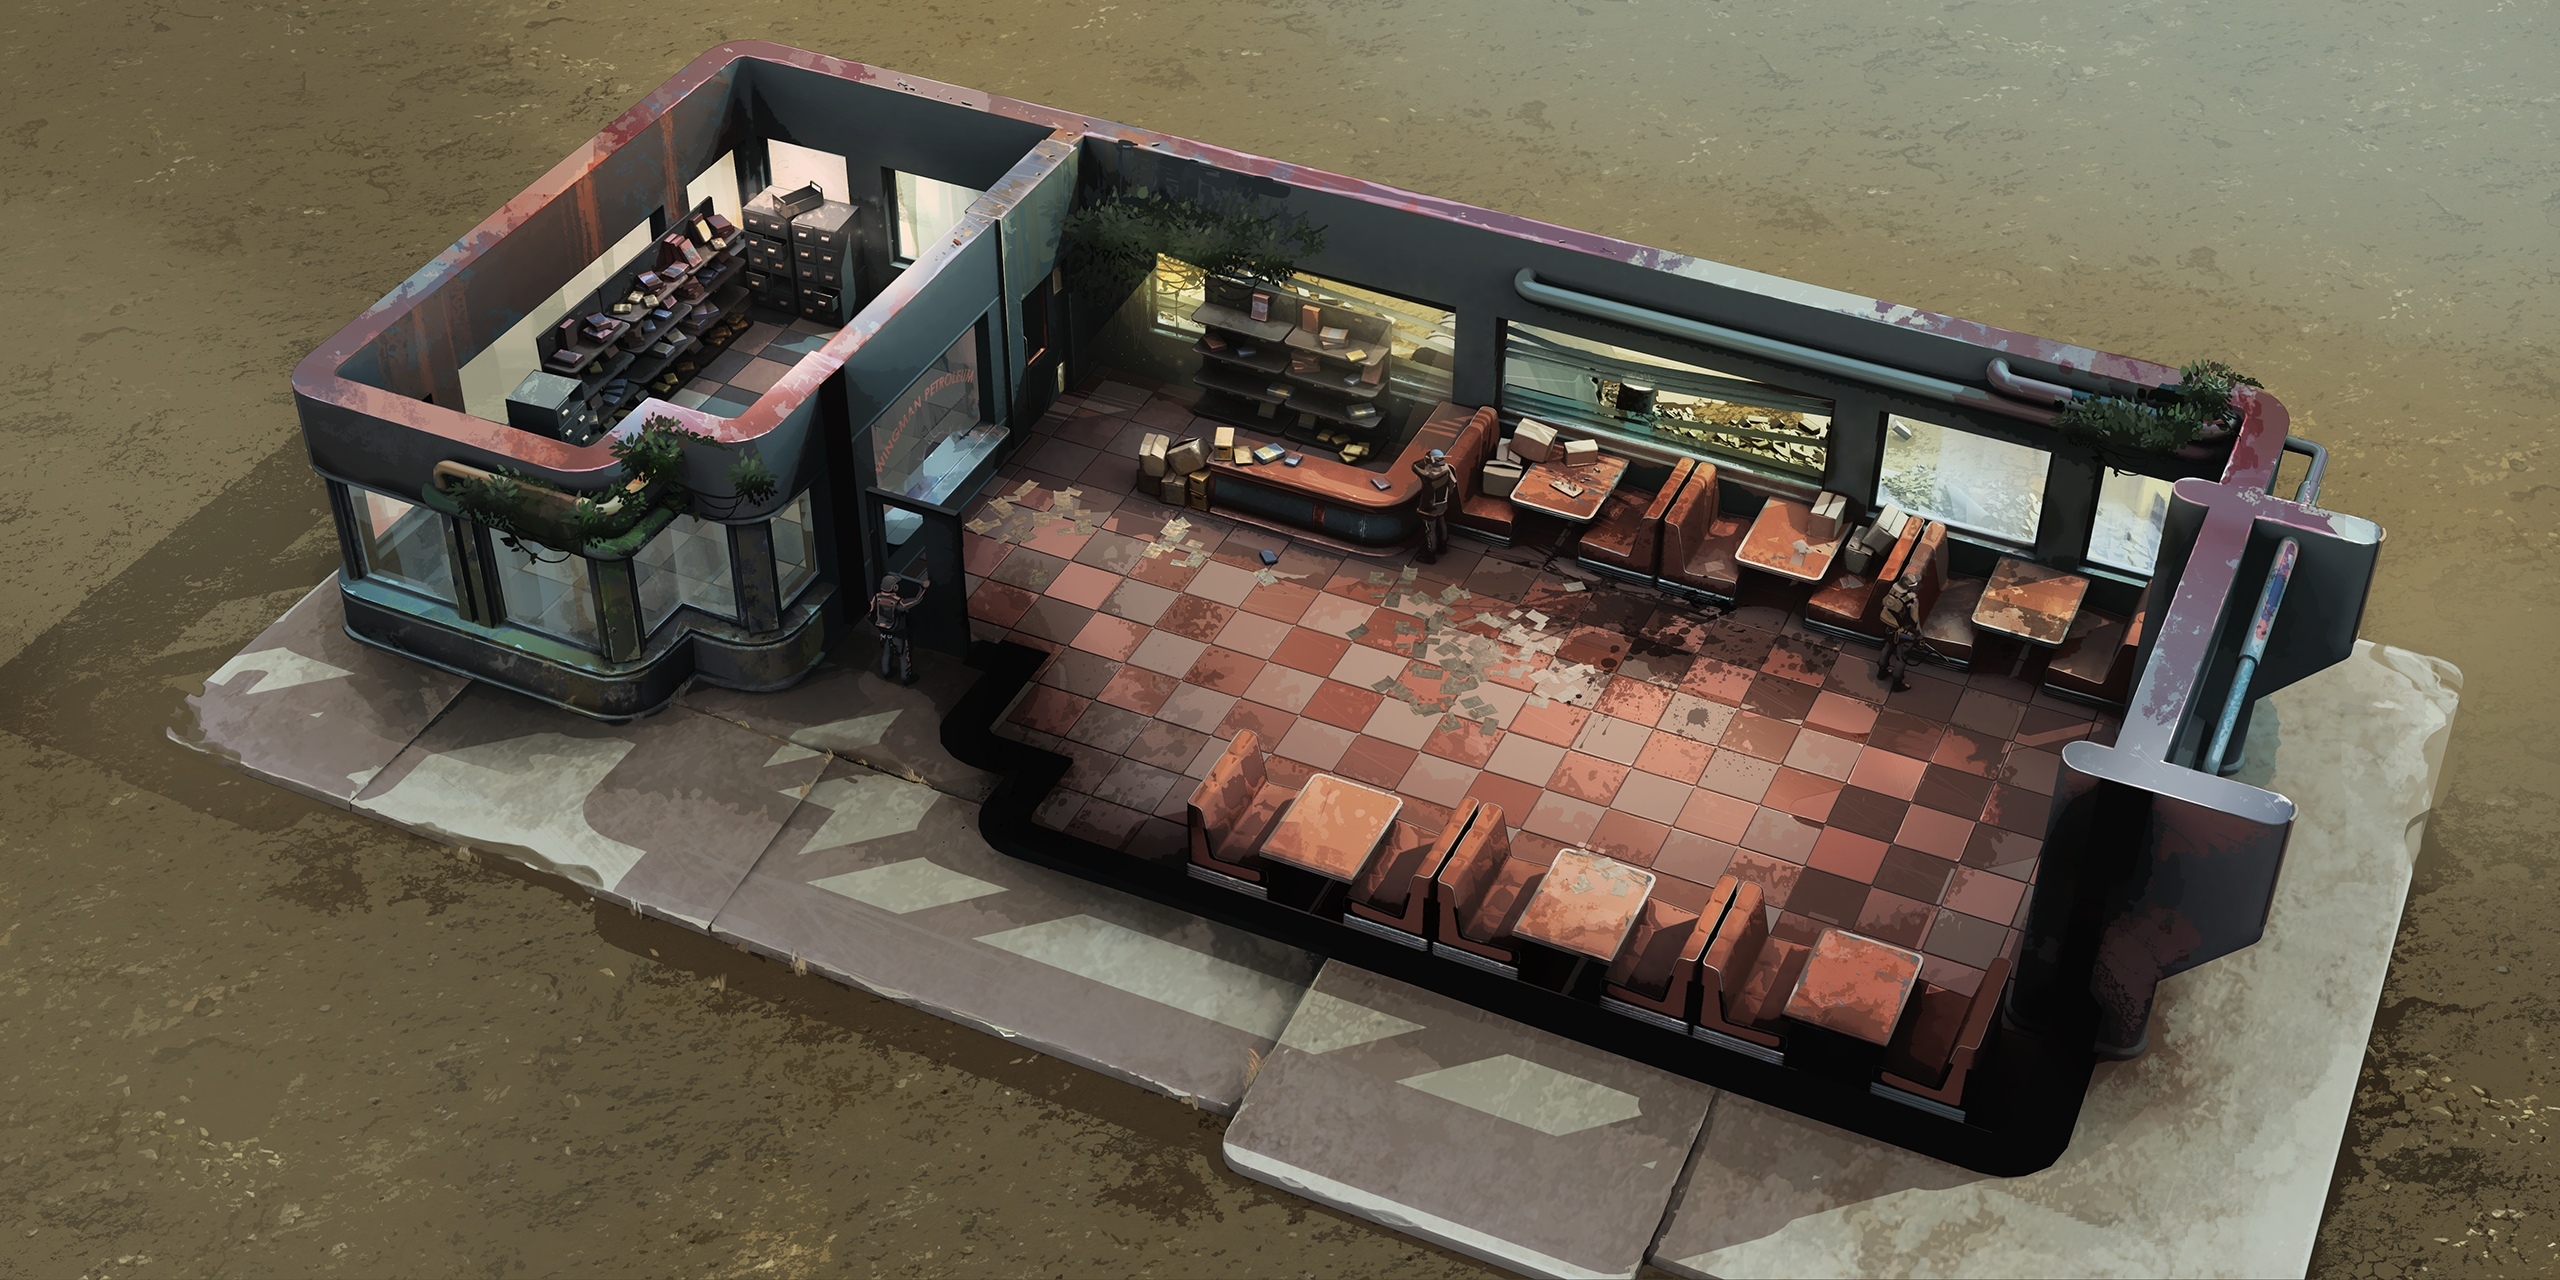 traveller rpg large cargo containers